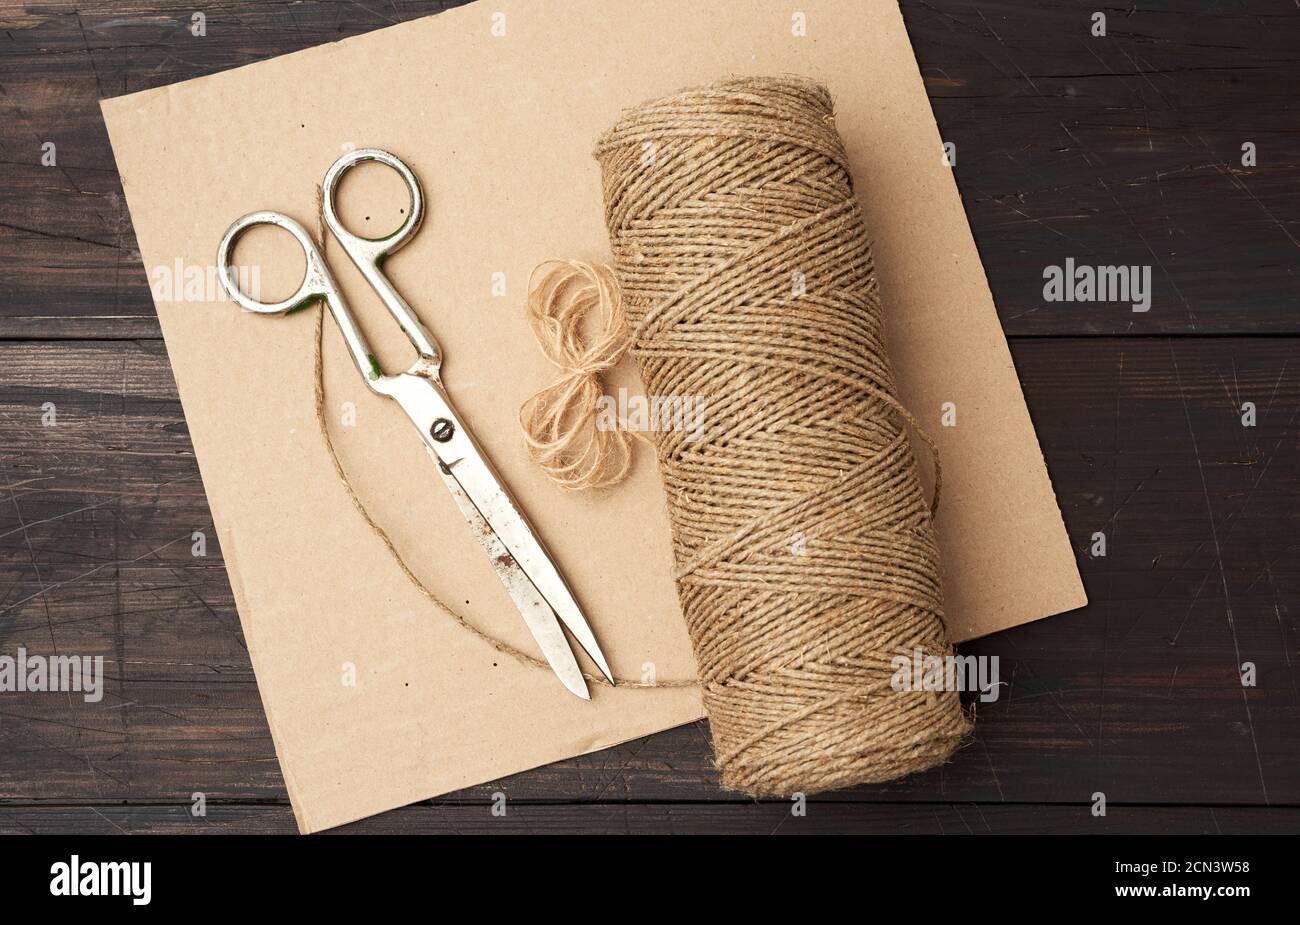 wn thread twisted into a spool and vintage metal scissors on a wooden background from boards Stock Photo